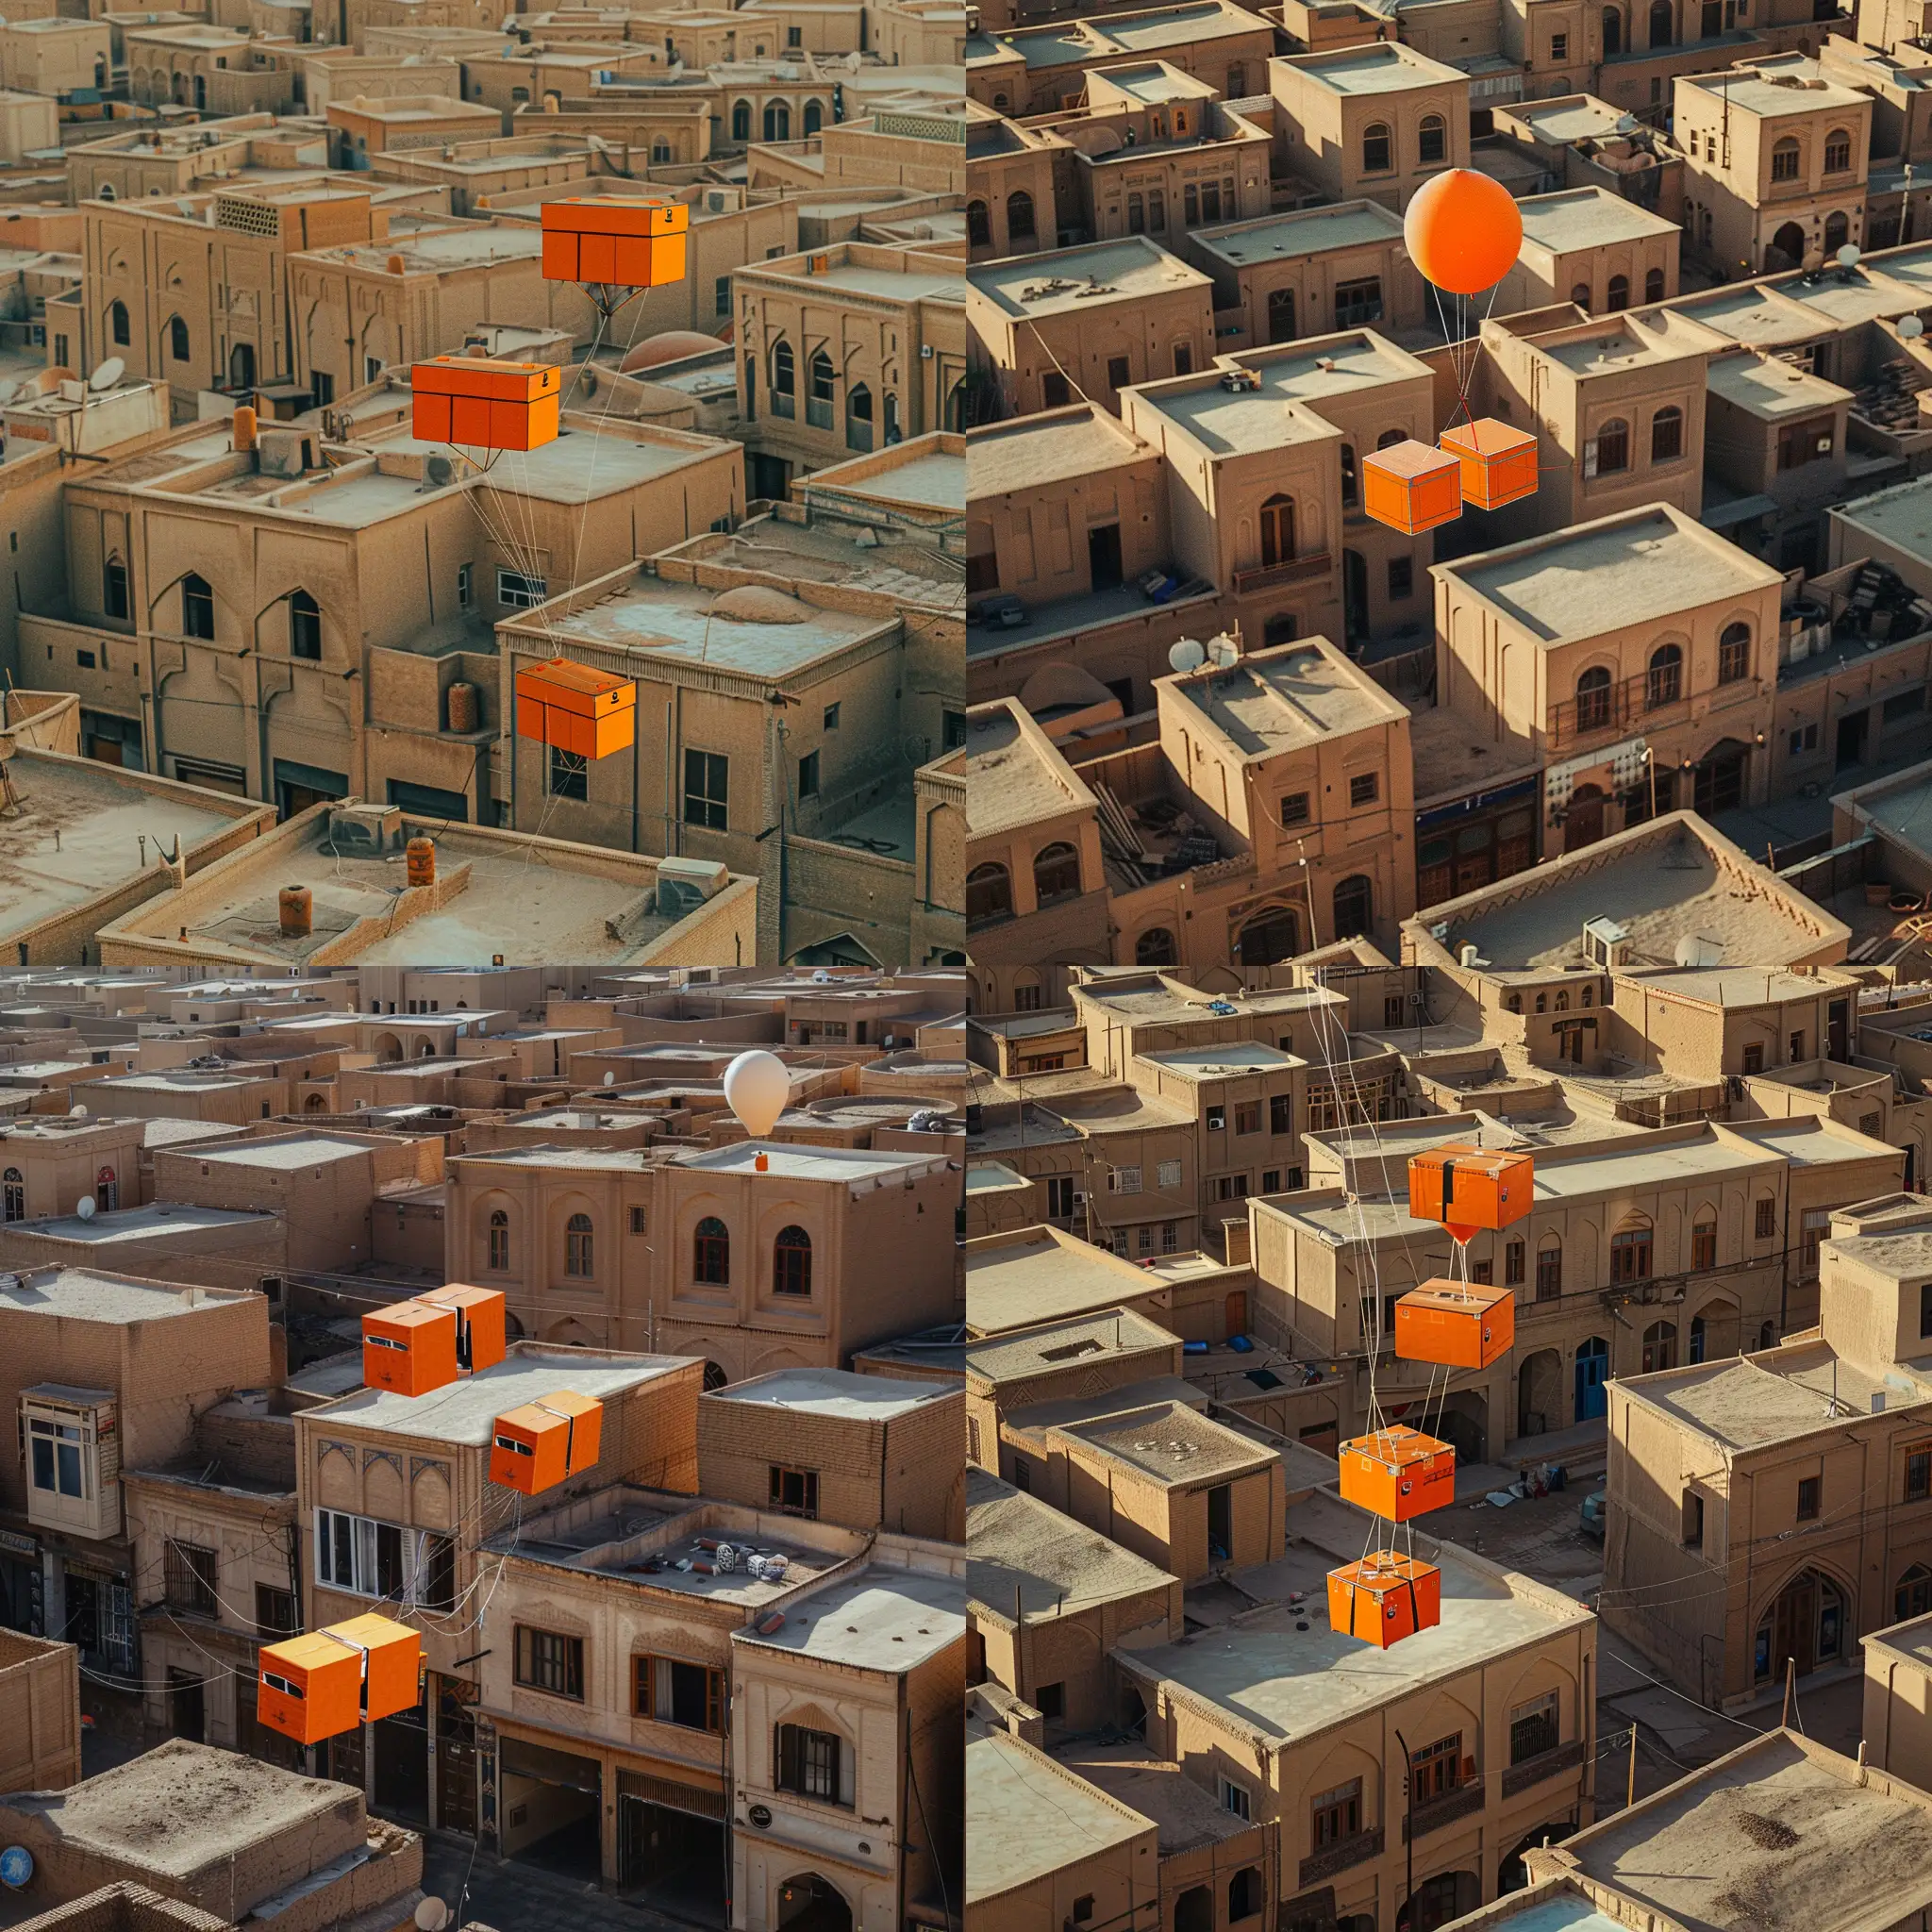 Aerial-View-of-Yazd-City-with-Three-Orange-Boxes-Landing-by-Balloon